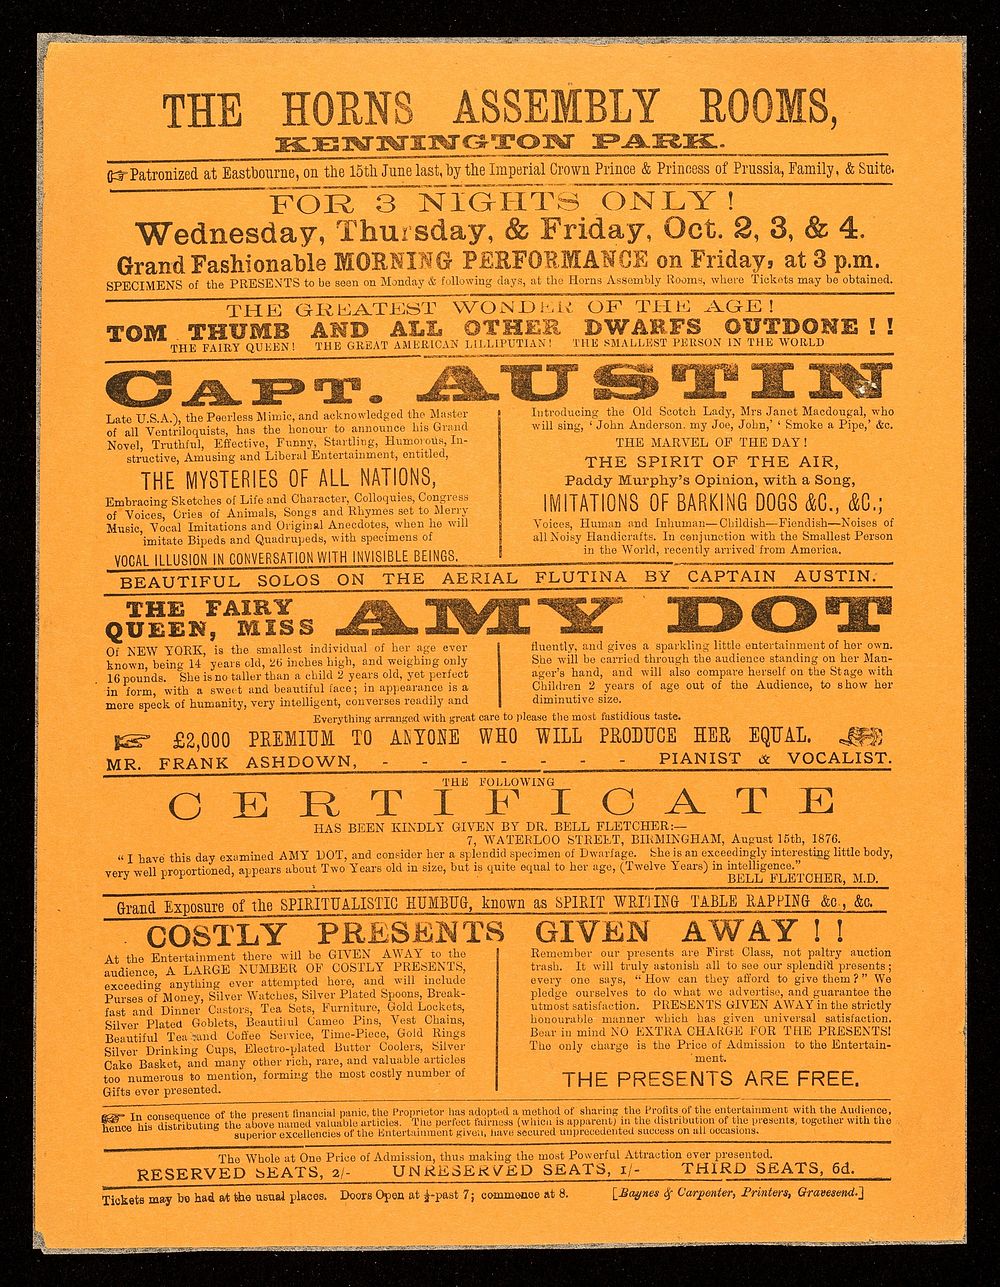 [Undated handbill (after 1876) for a 3 night variety show featuring Capt. Austin (mimic and ventriloquist) and Amy Dot, the…